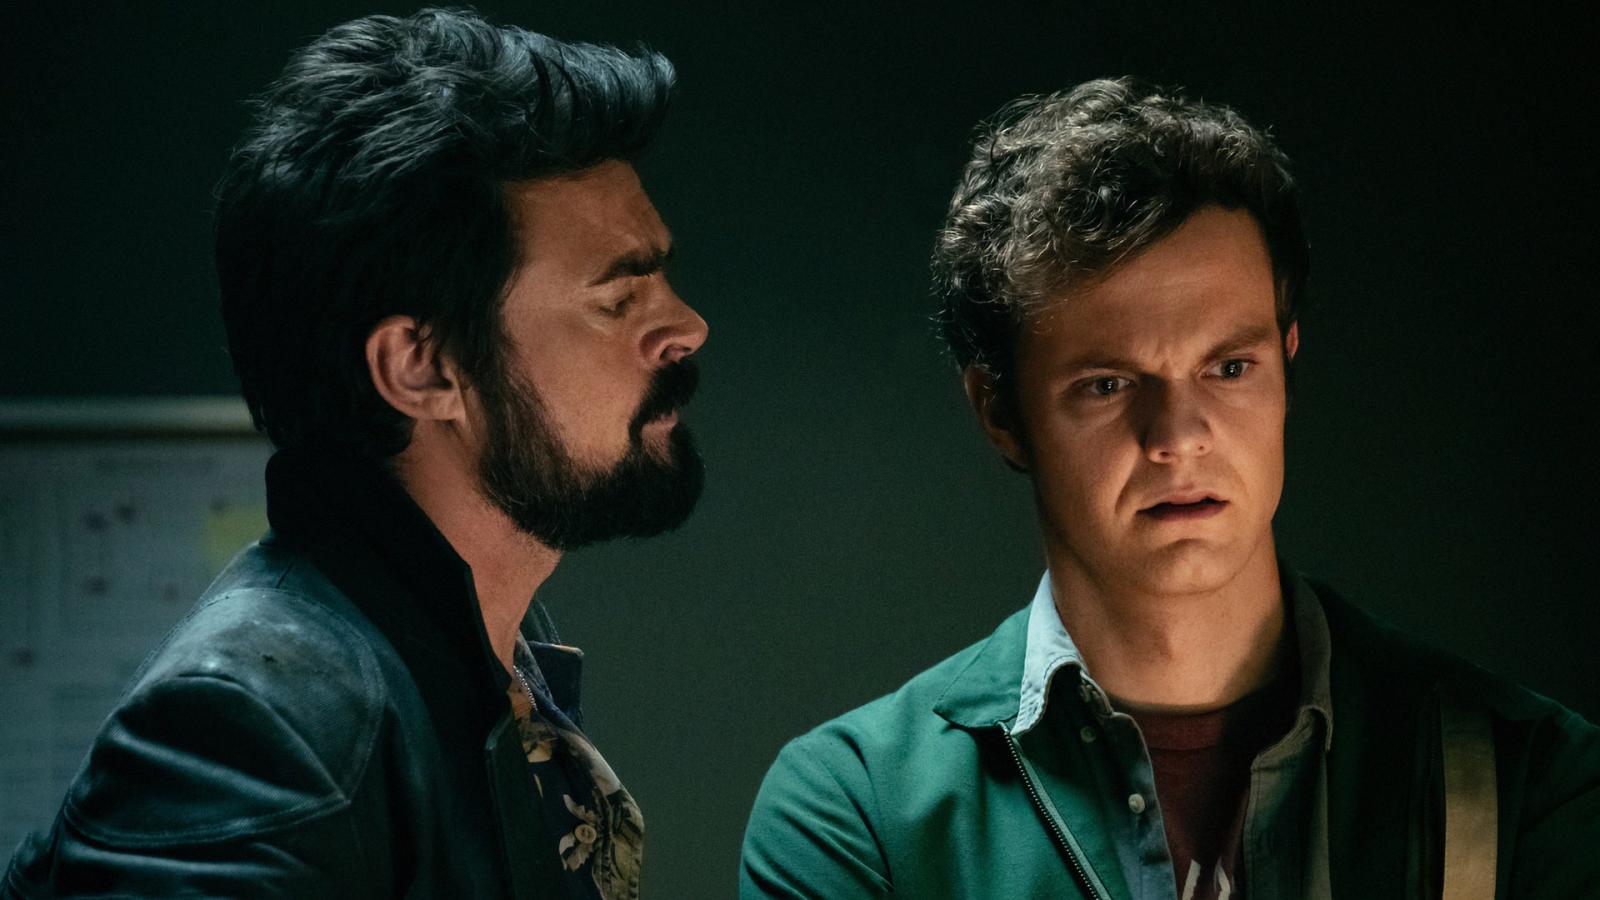 Love Some Bromance? 4 Best Shows on Amazon Prime You Can Watch Now - image 4